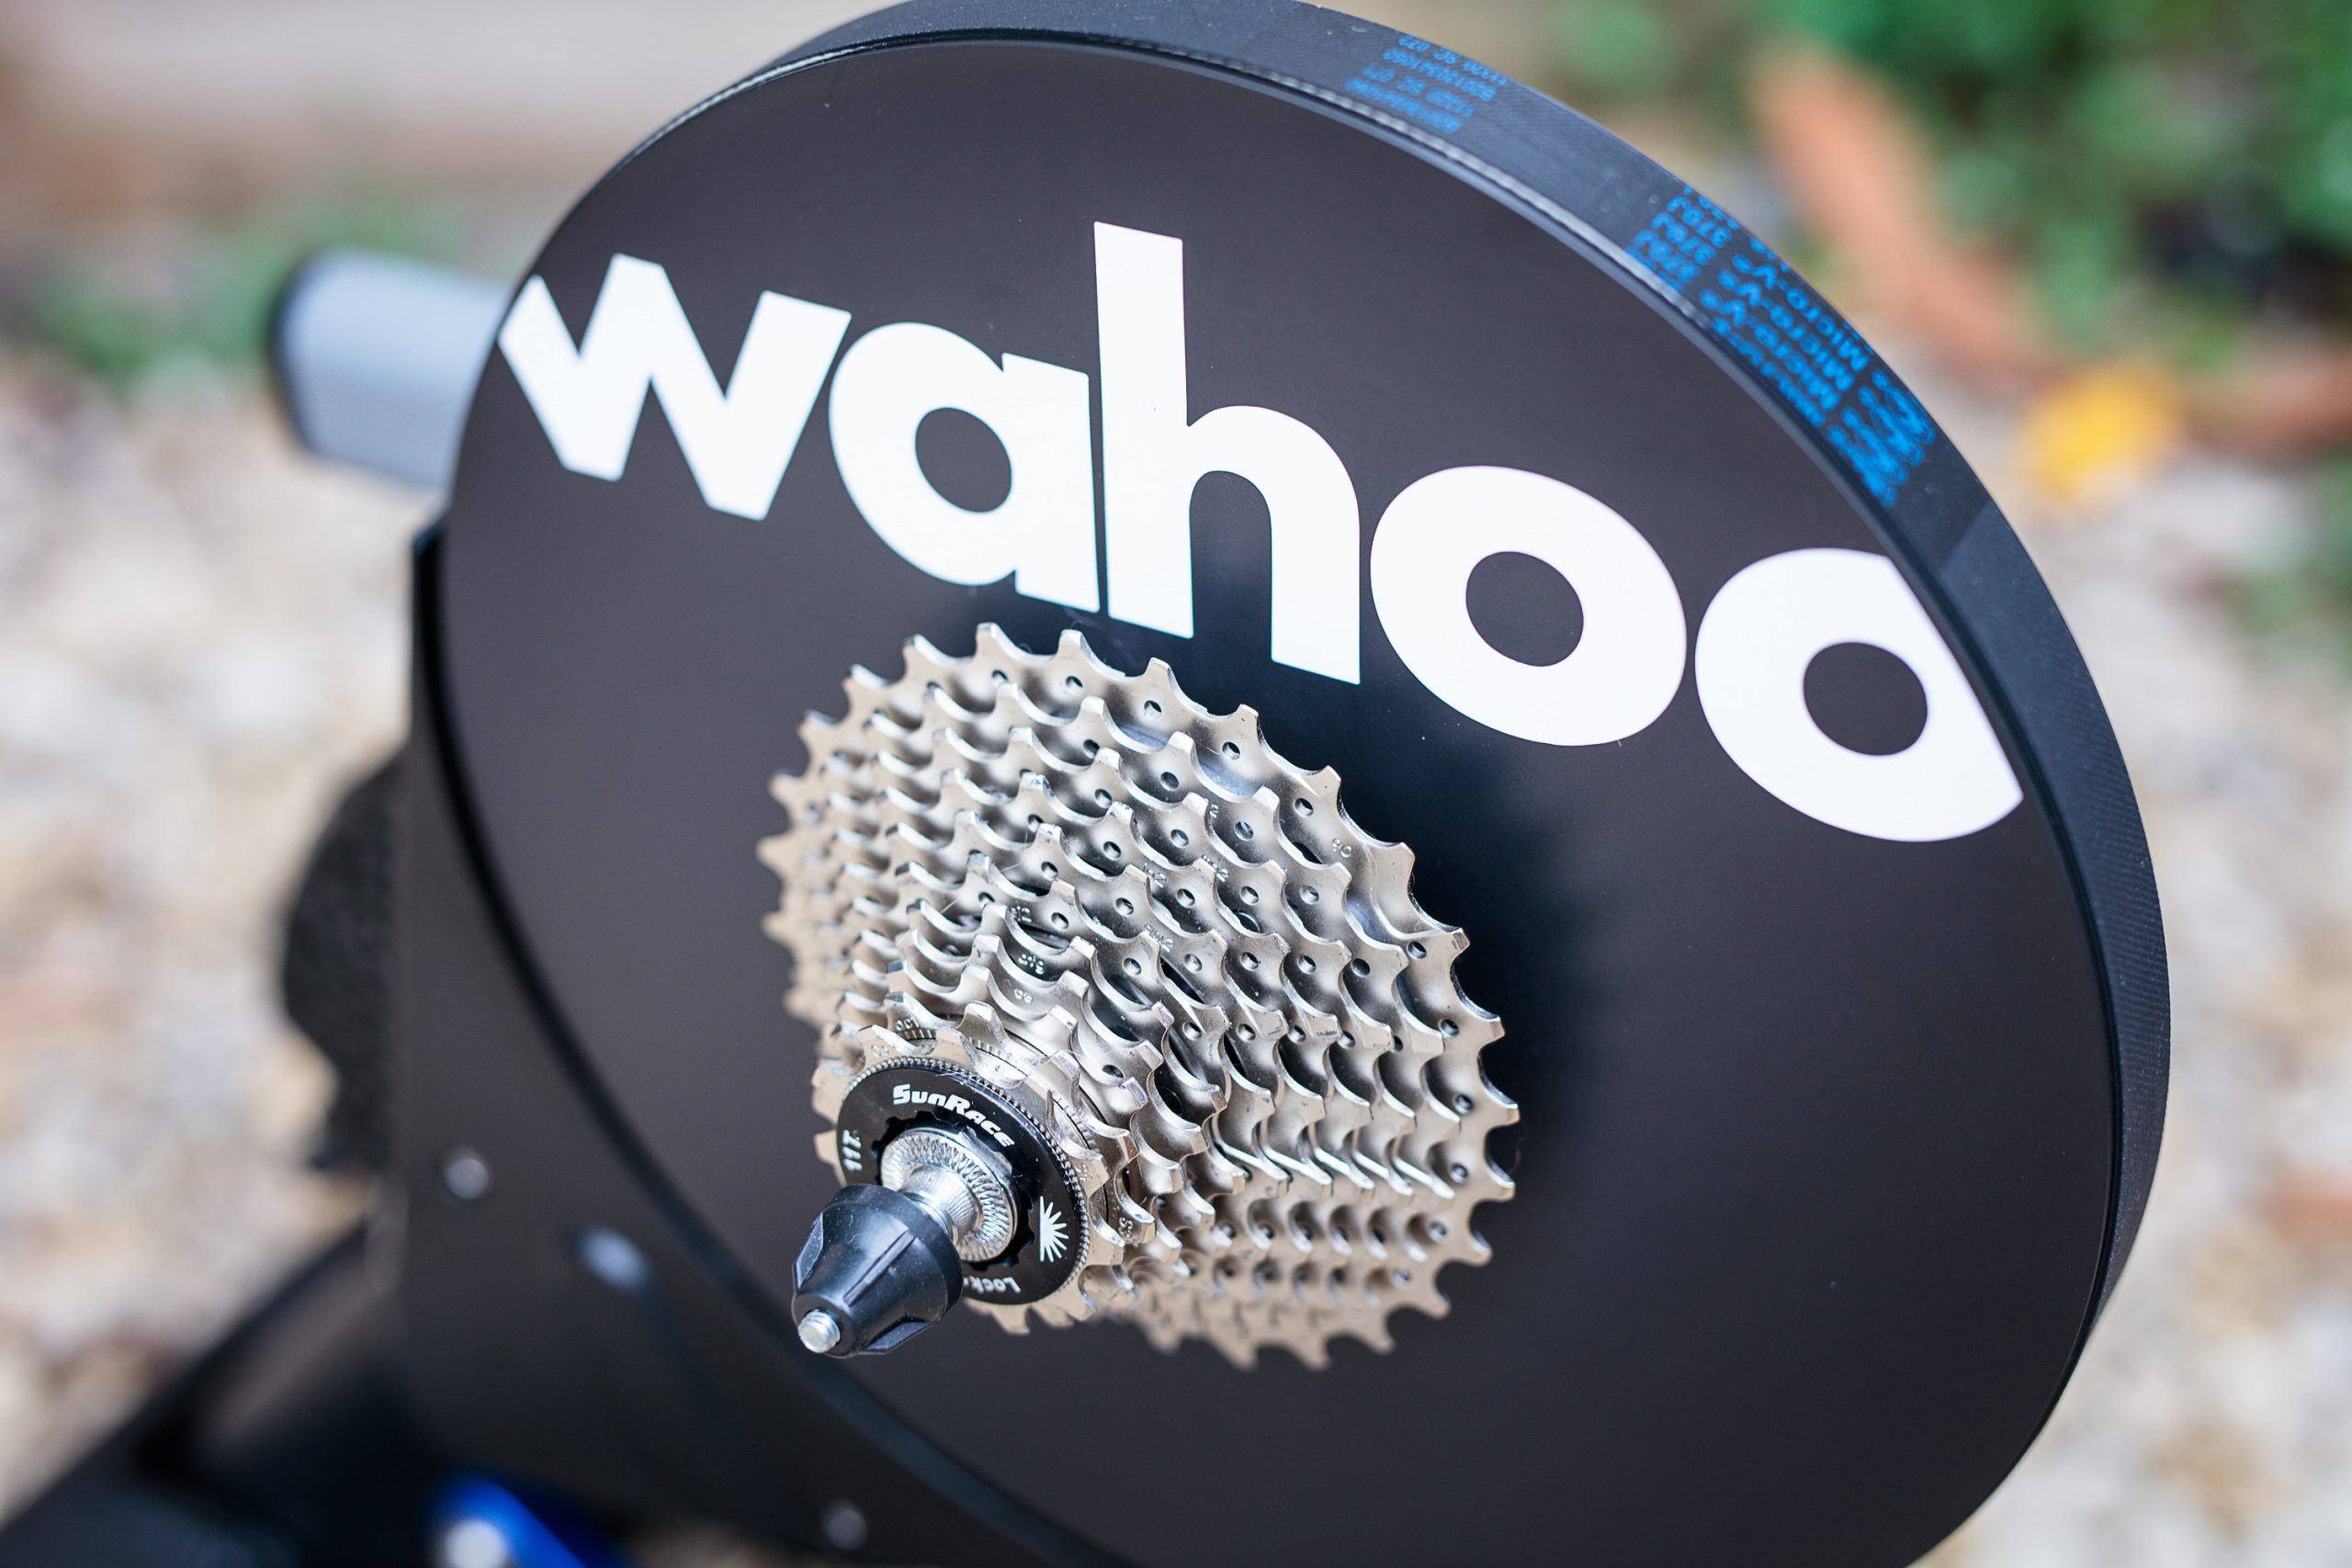 Wahoo Kickr 2020 (V5) smart trainer review